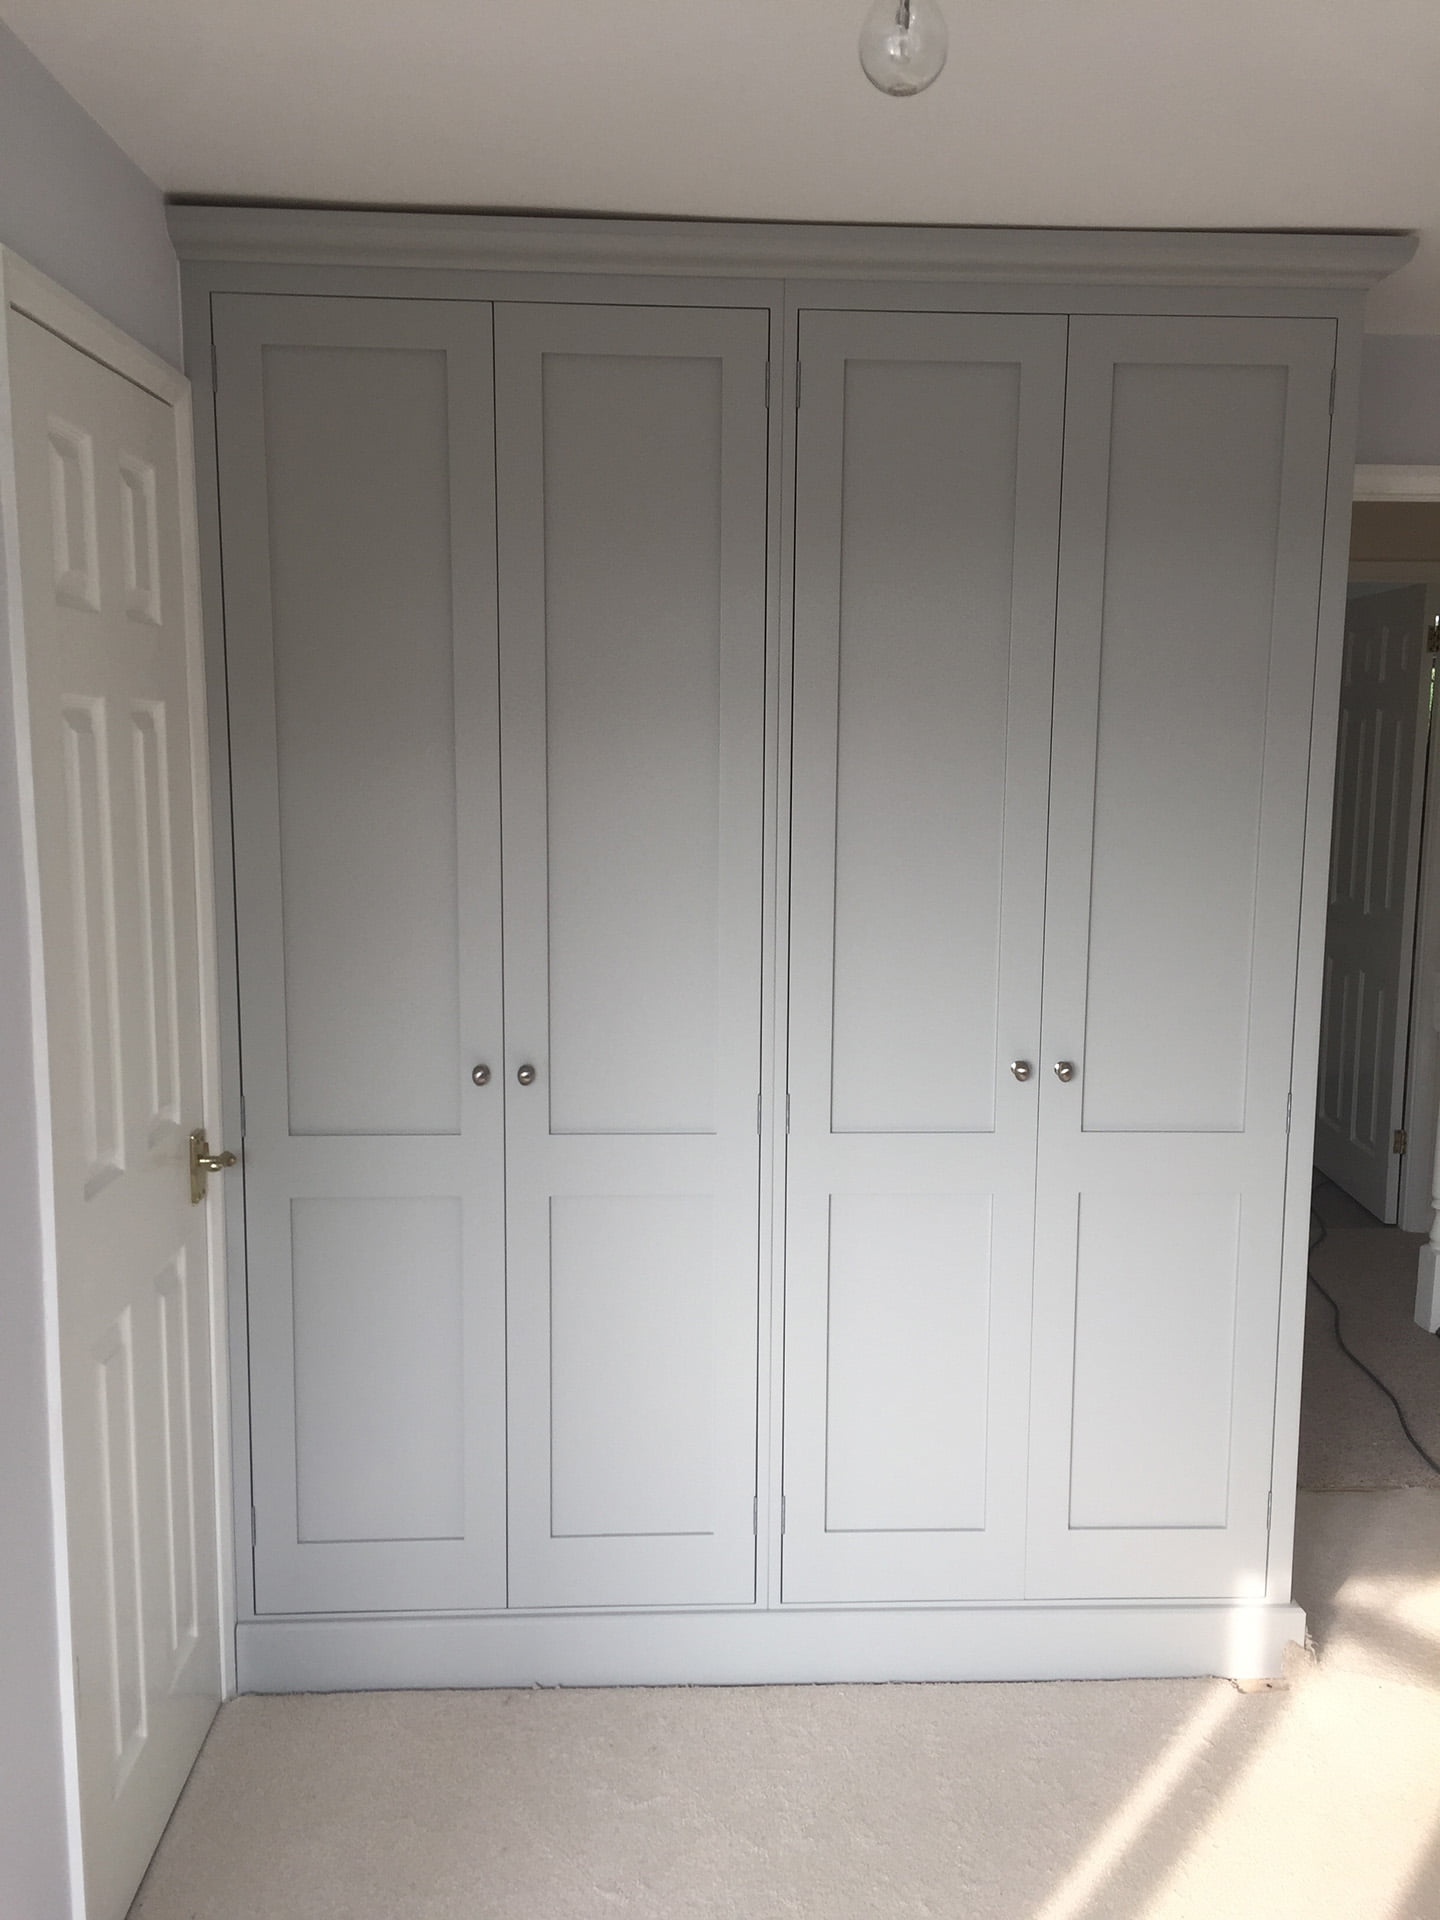 A front view of some bespoke wardrobes